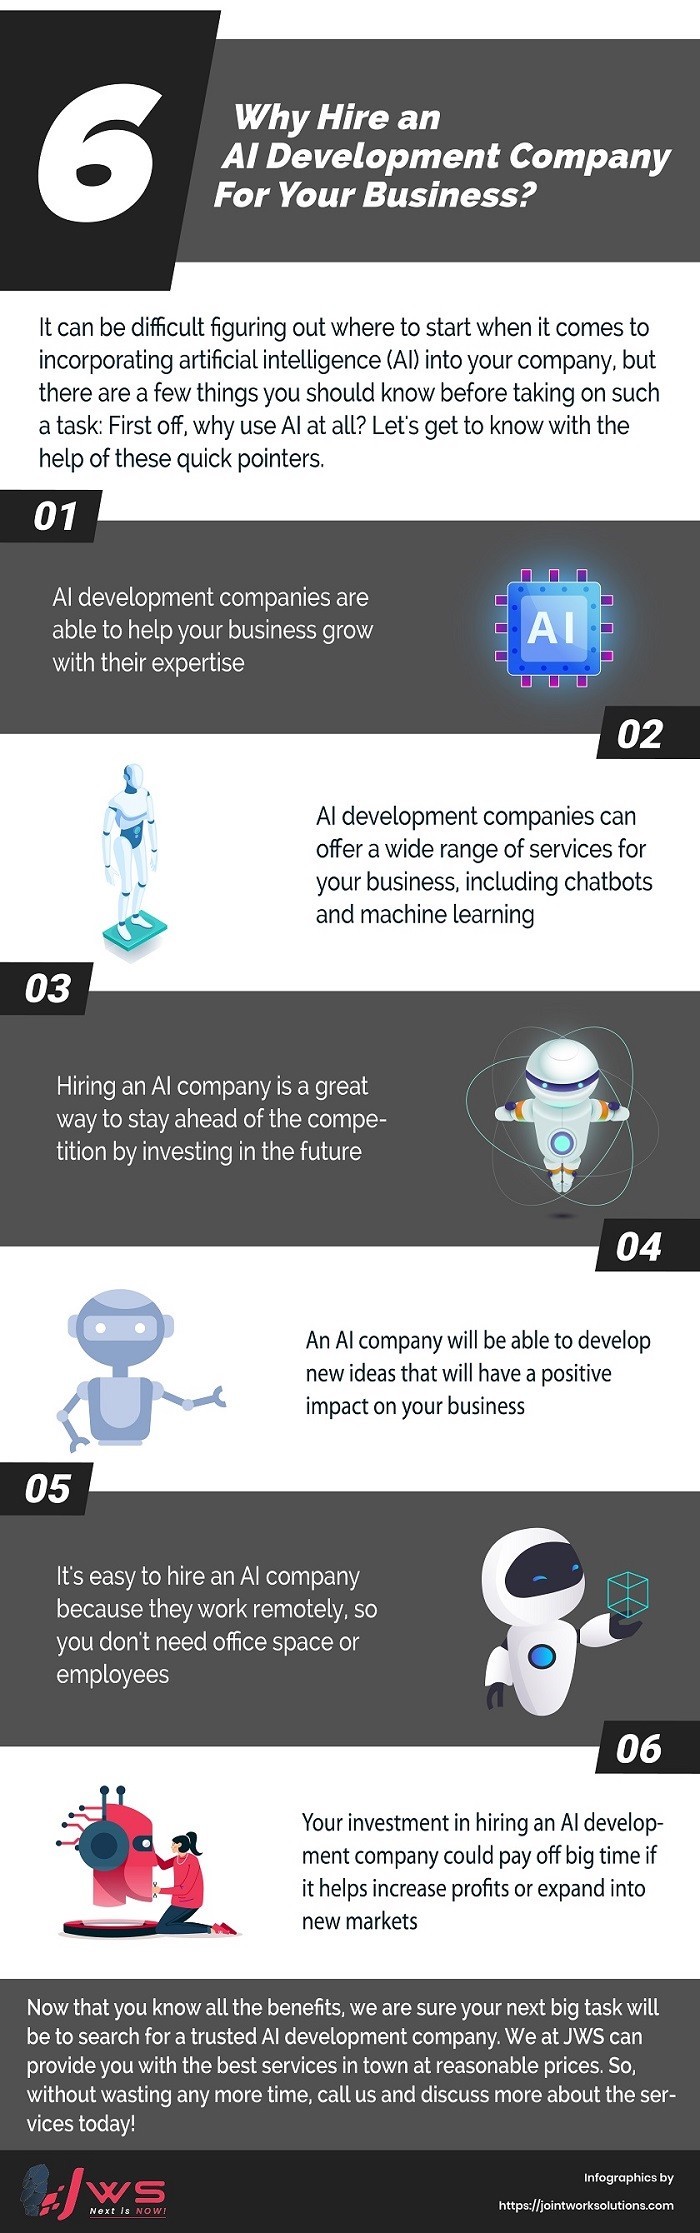 WHY HIRE AN AI DEVELOPMENT COMPANY FOR YOUR BUSINESS?